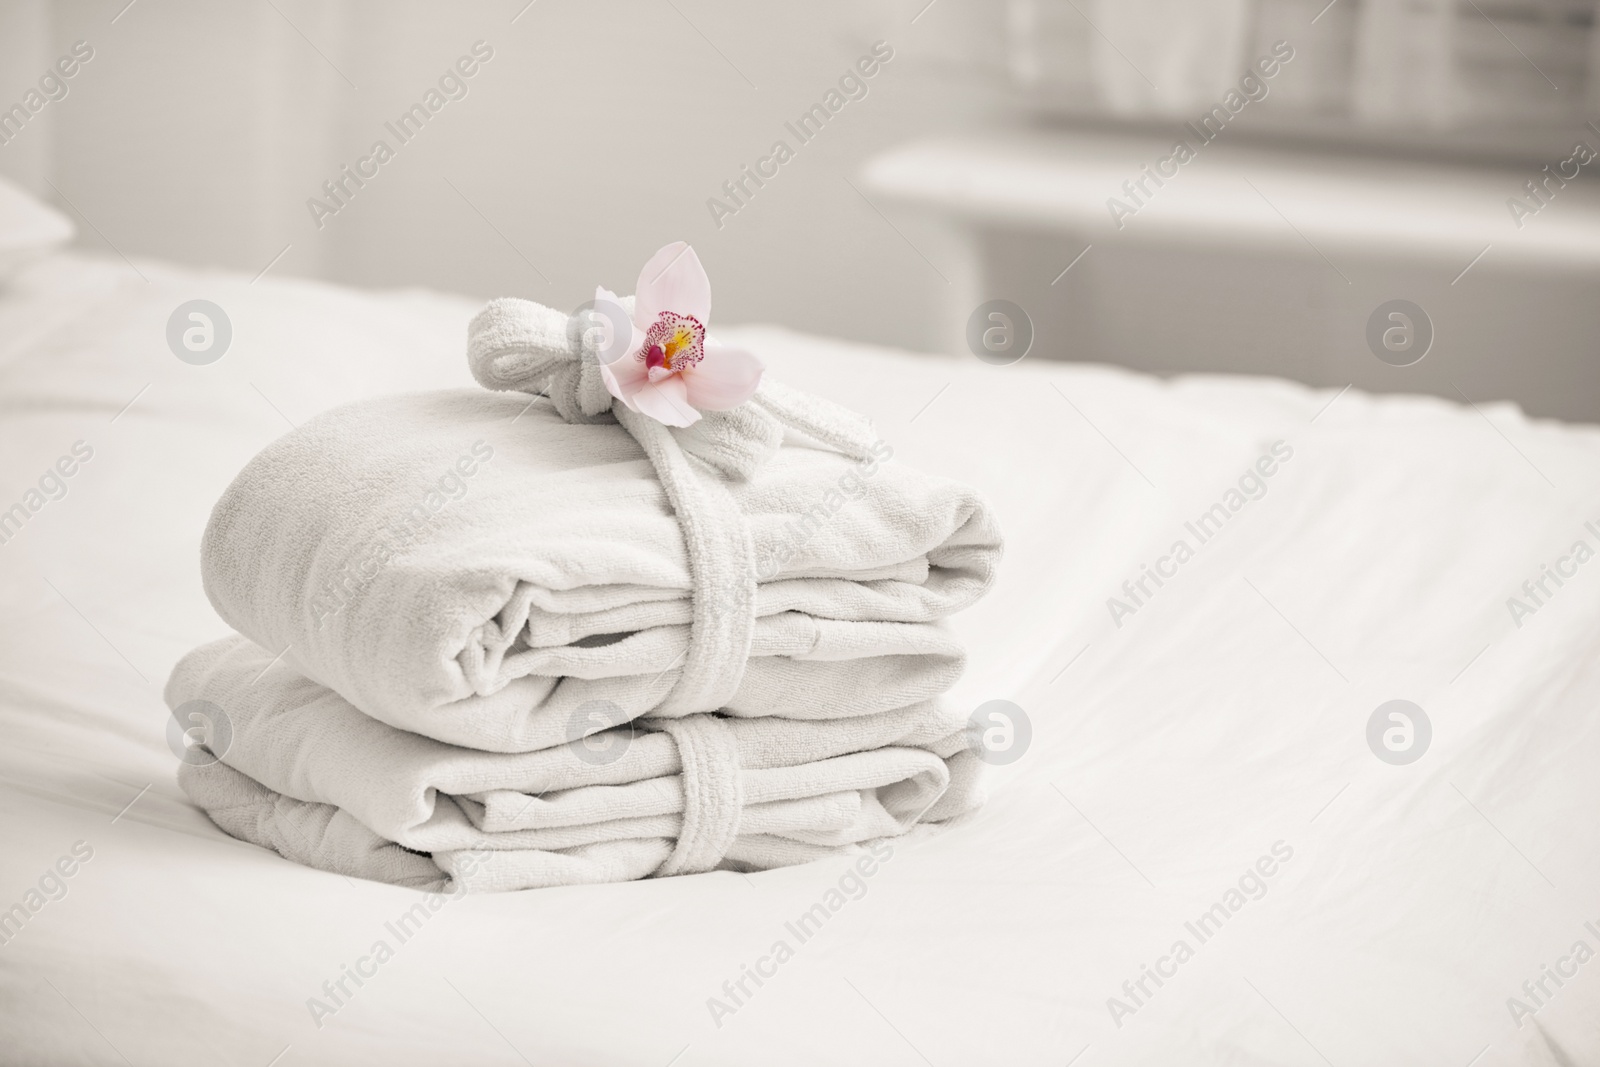 Photo of Clean folded bathrobes on bed in room, space for text